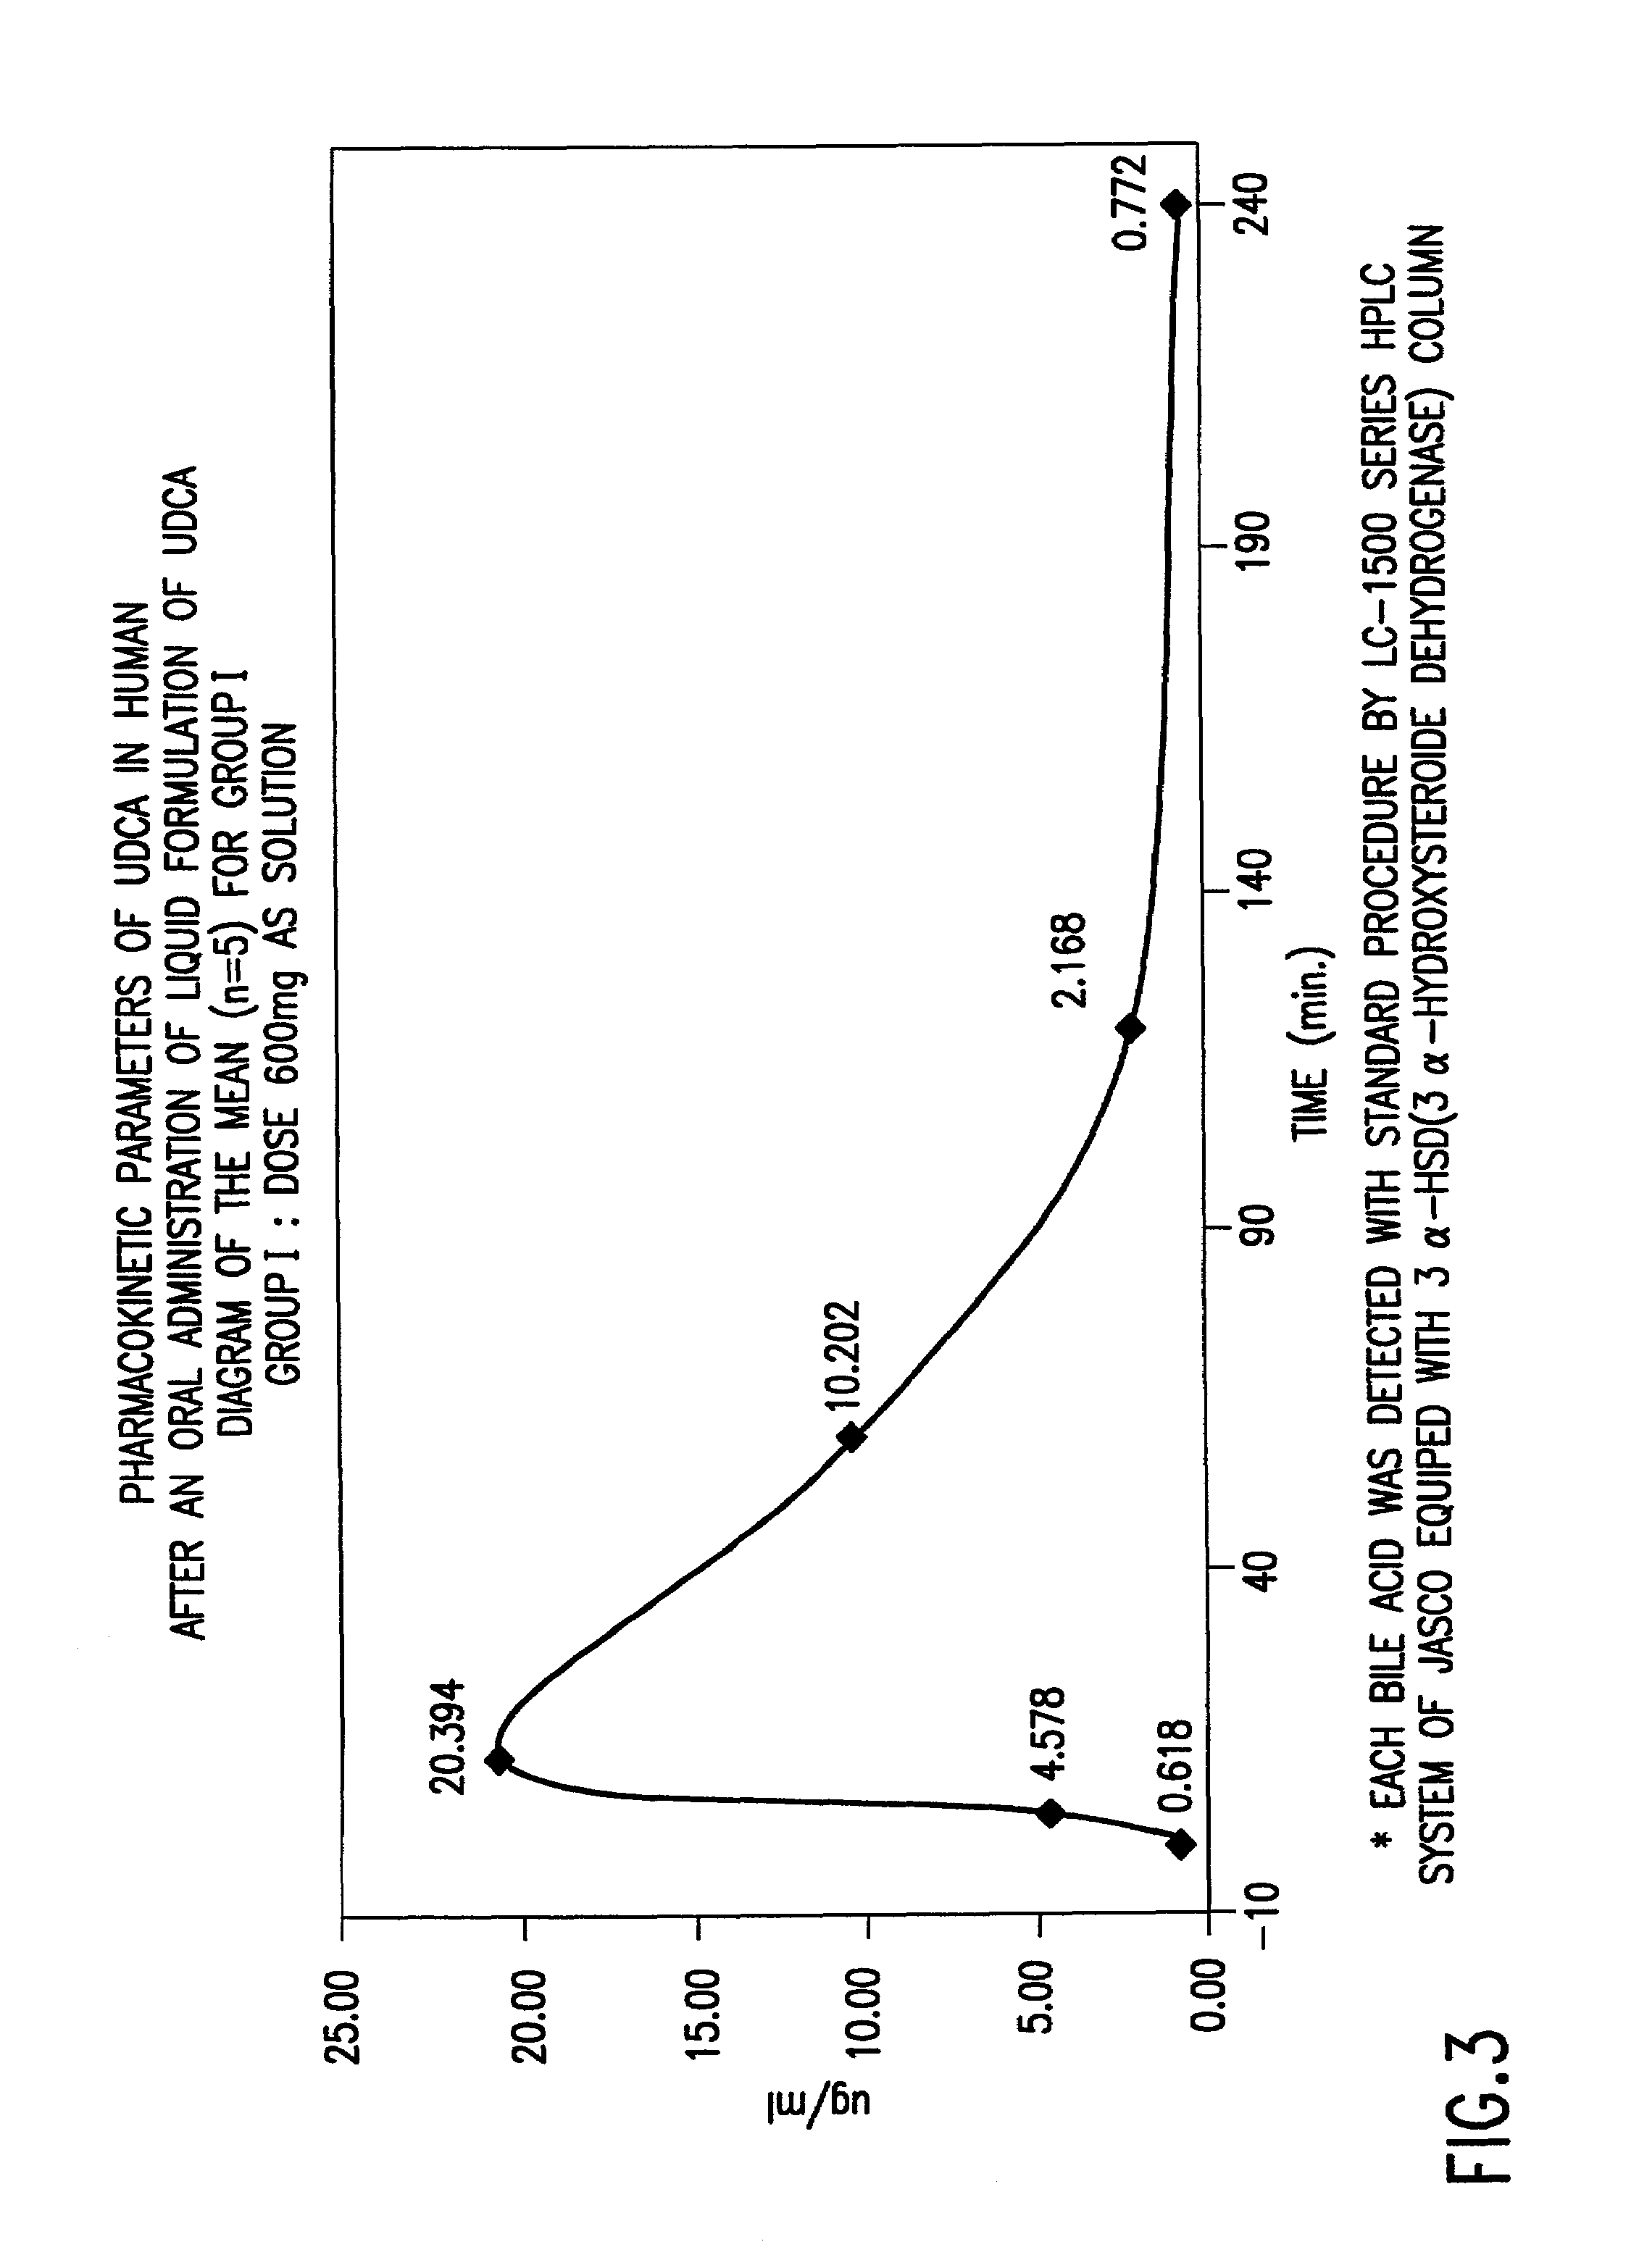 Preparation of aqueous clear solution dosage forms with bile acids